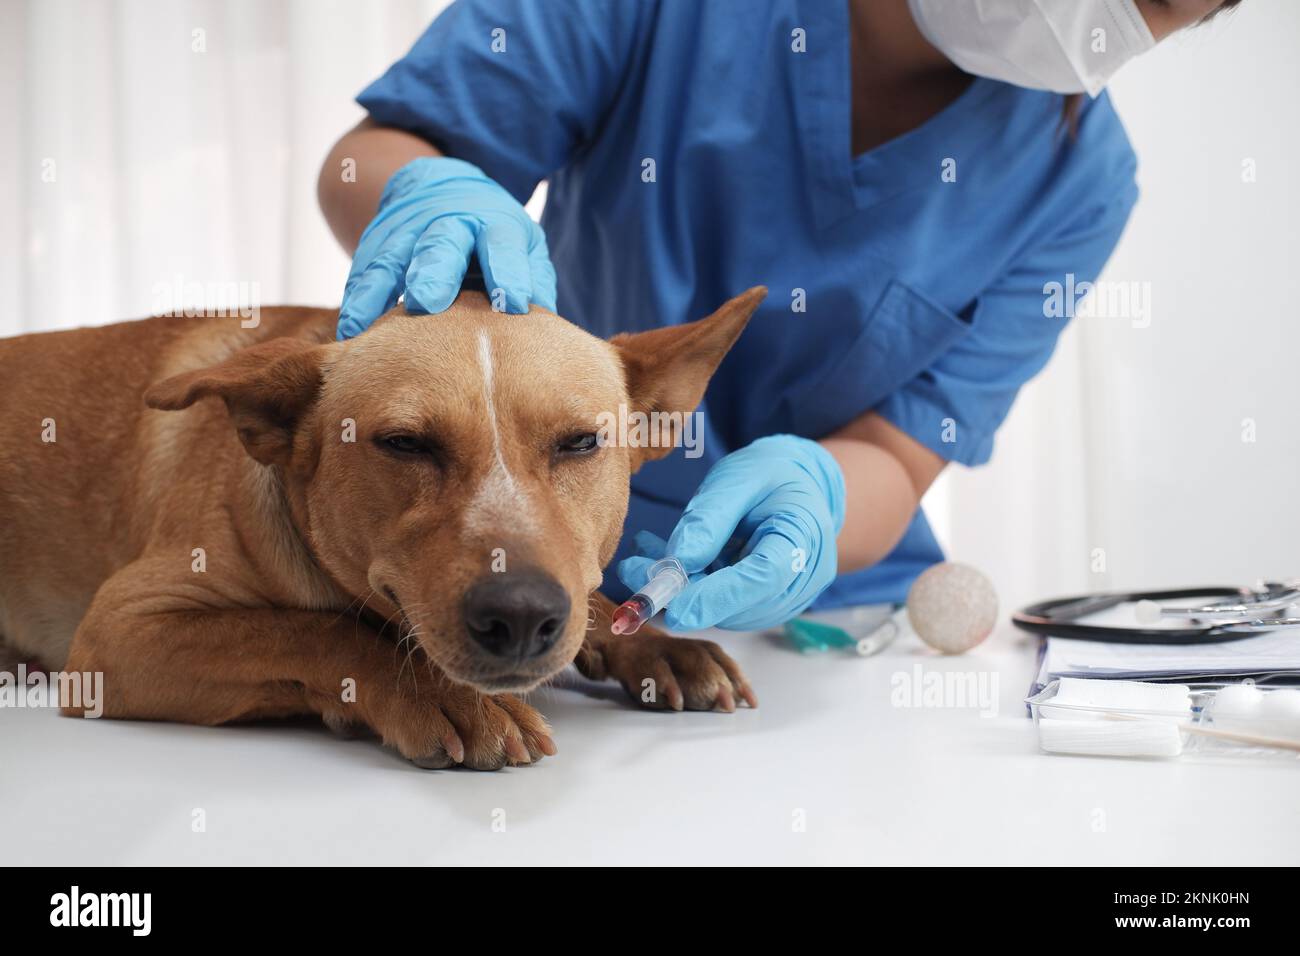 The veterinarian doctor treating, checking on dog at vet clinic Stock Photo